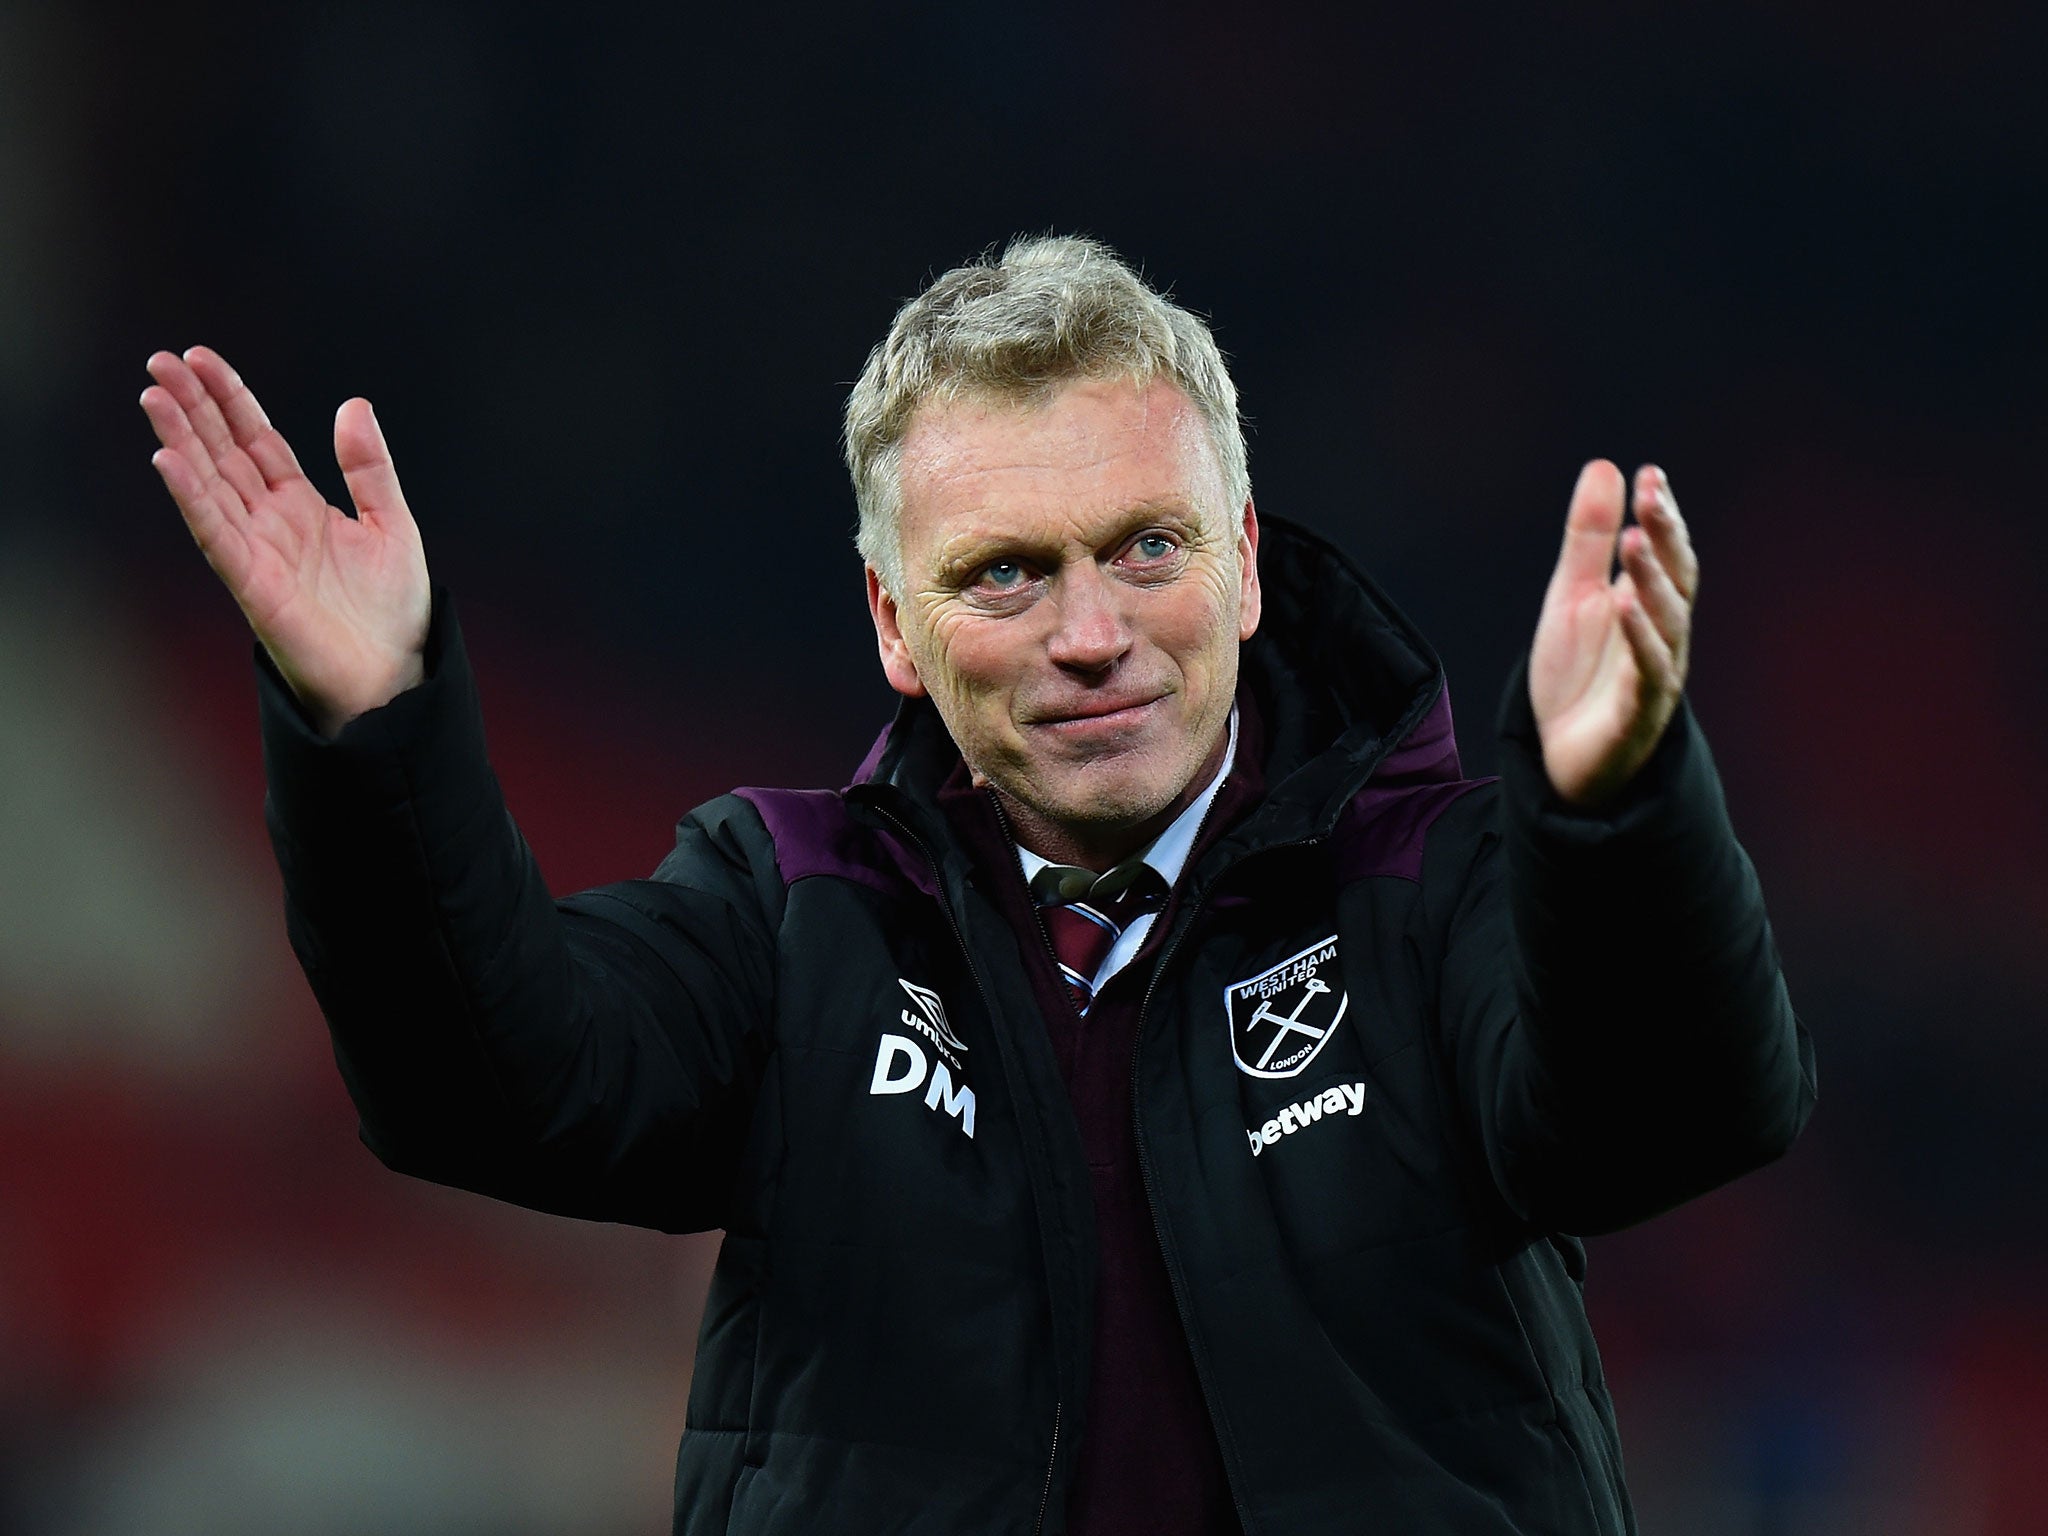 David Moyes celebrates after his side's win over West Ham